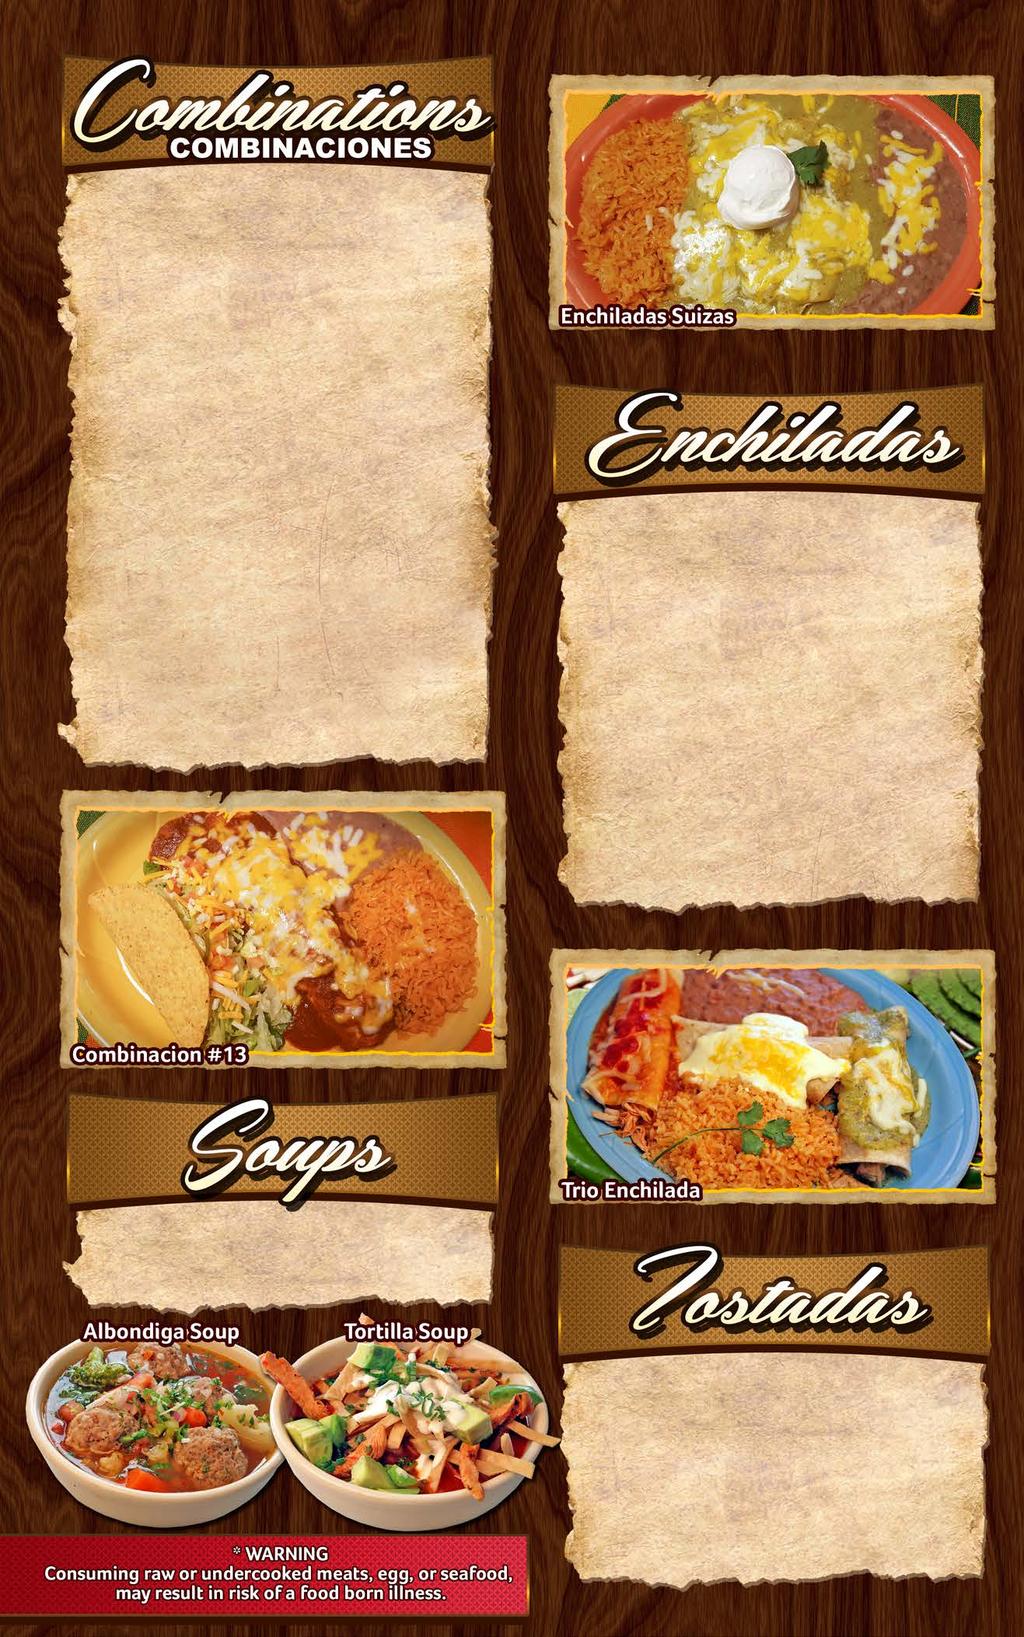 Served with rice and beans 1. BEEF BURRITO AND CHIMICHANGA 11.95 2. CHILE RELLENO AND ENCHILADA 11.95 3. BEEF BURRITO AND ENCHILADA 11.95 4. ENCHILADA AND CHIMICHANGA 11.95 5.